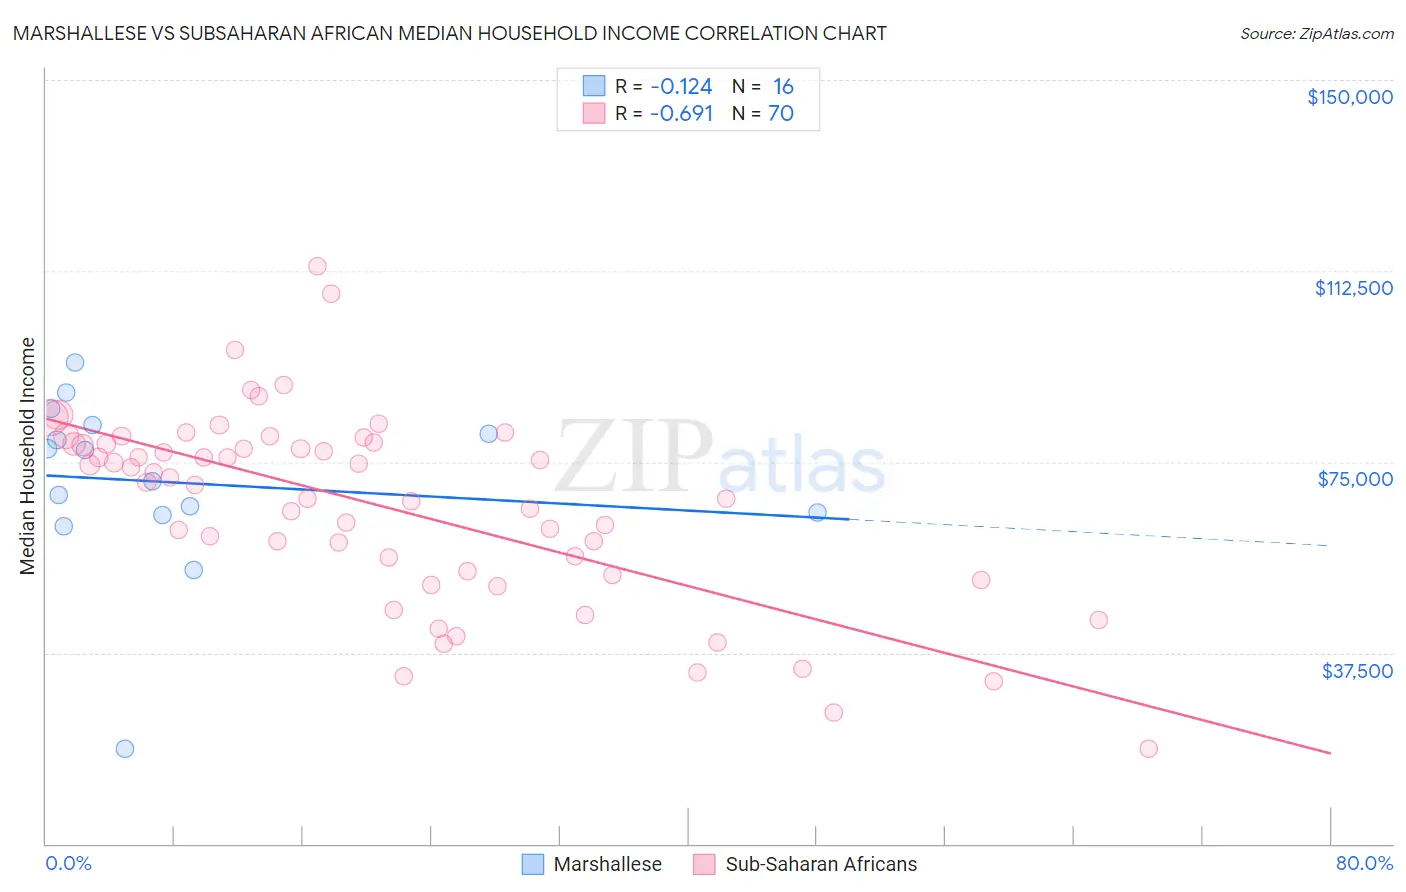 Marshallese vs Subsaharan African Median Household Income